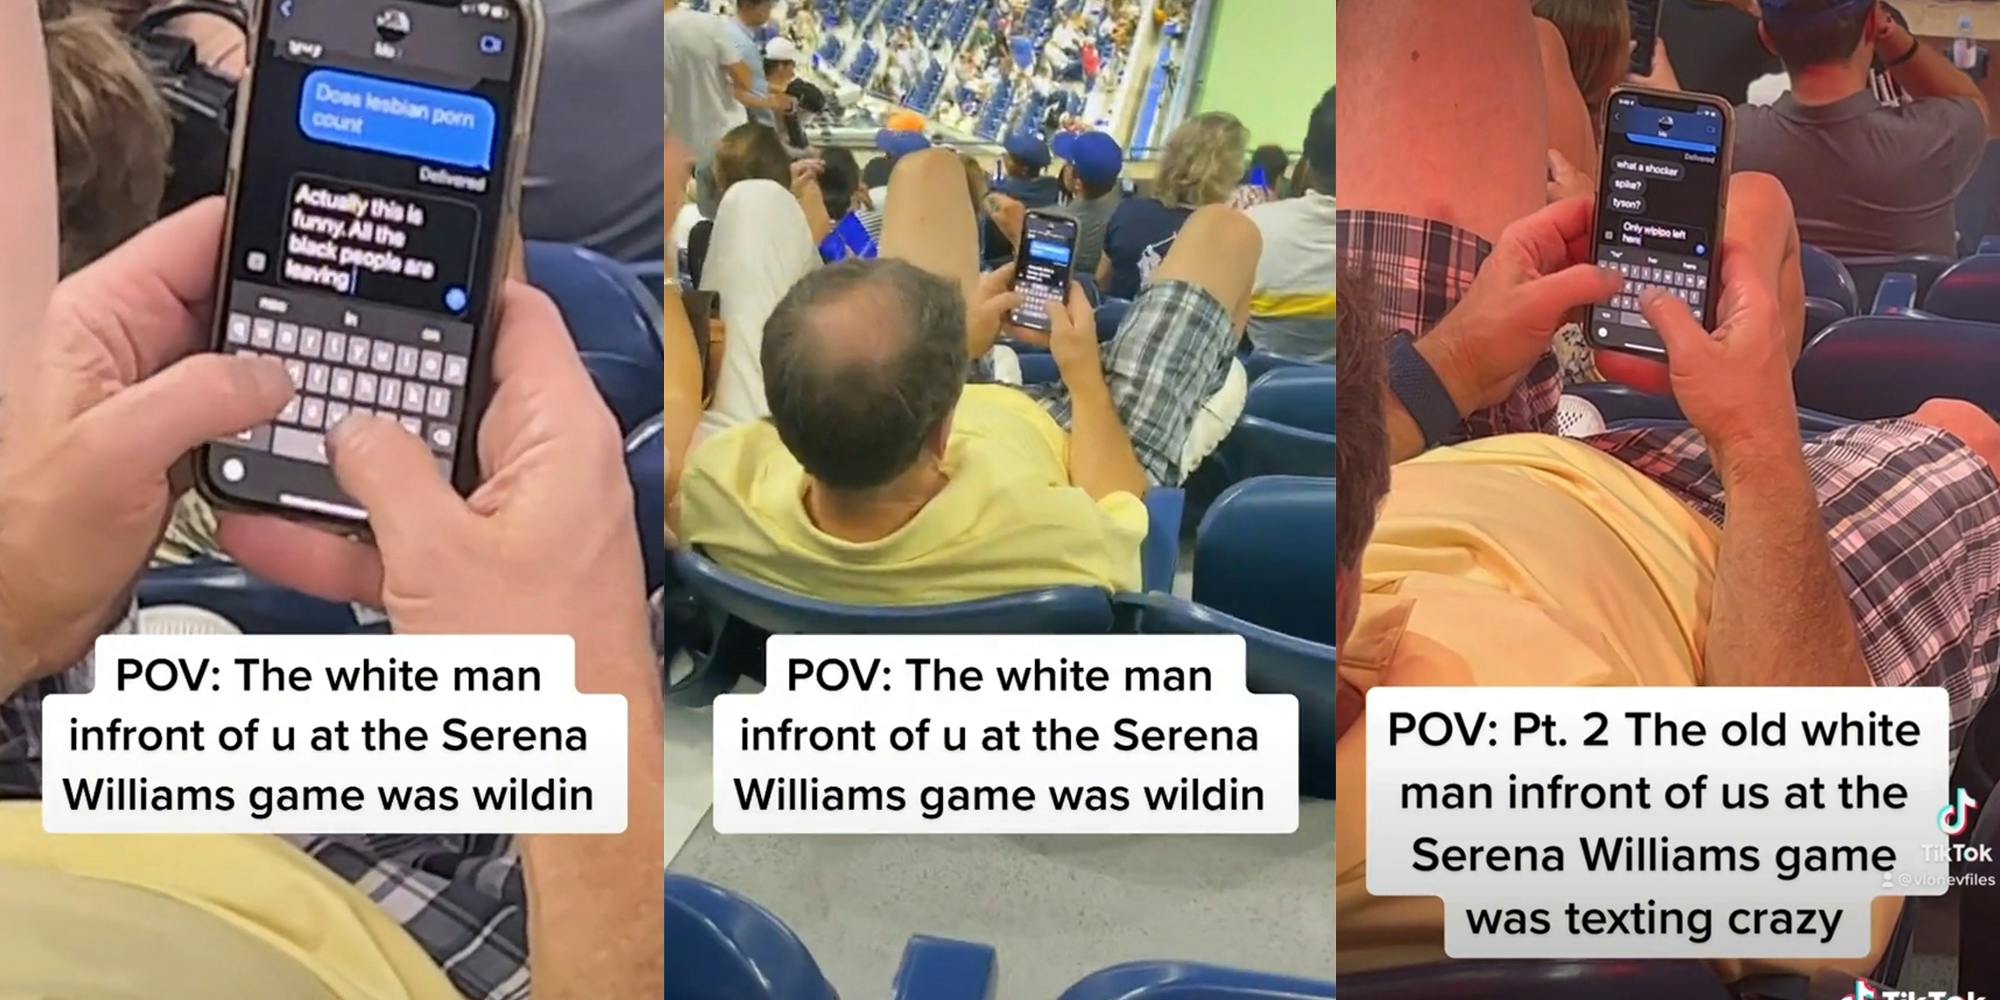 man at tennis match texting "Actually this is funny. All the black people are leaving" with caption "POV: The white man infront of u at the Serena Williams game was wildin"